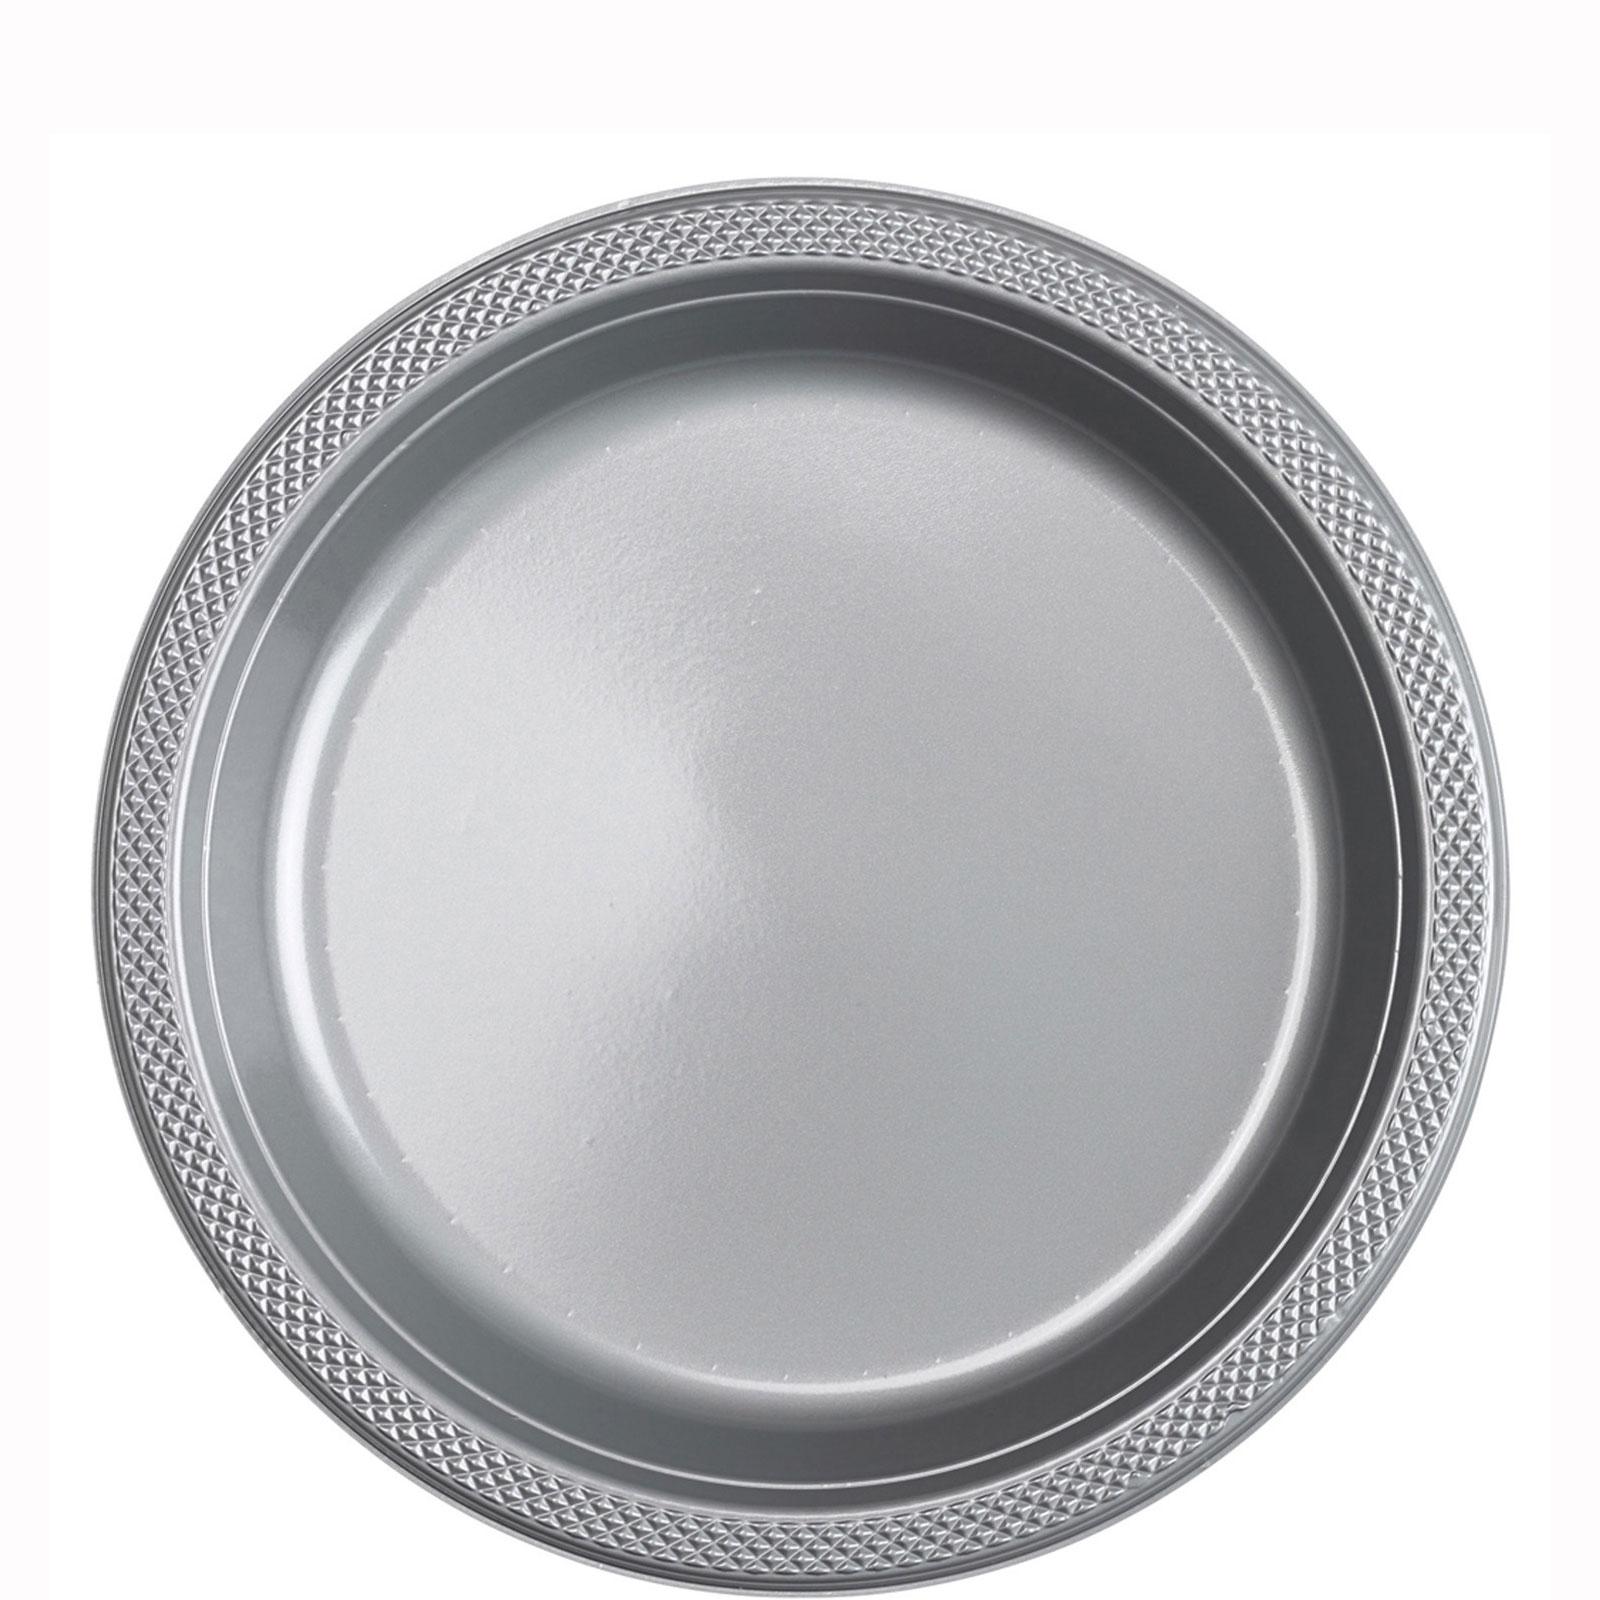 Silver Sparkle Plastic Plates 9in, 20pcs Solid Tableware - Party Centre